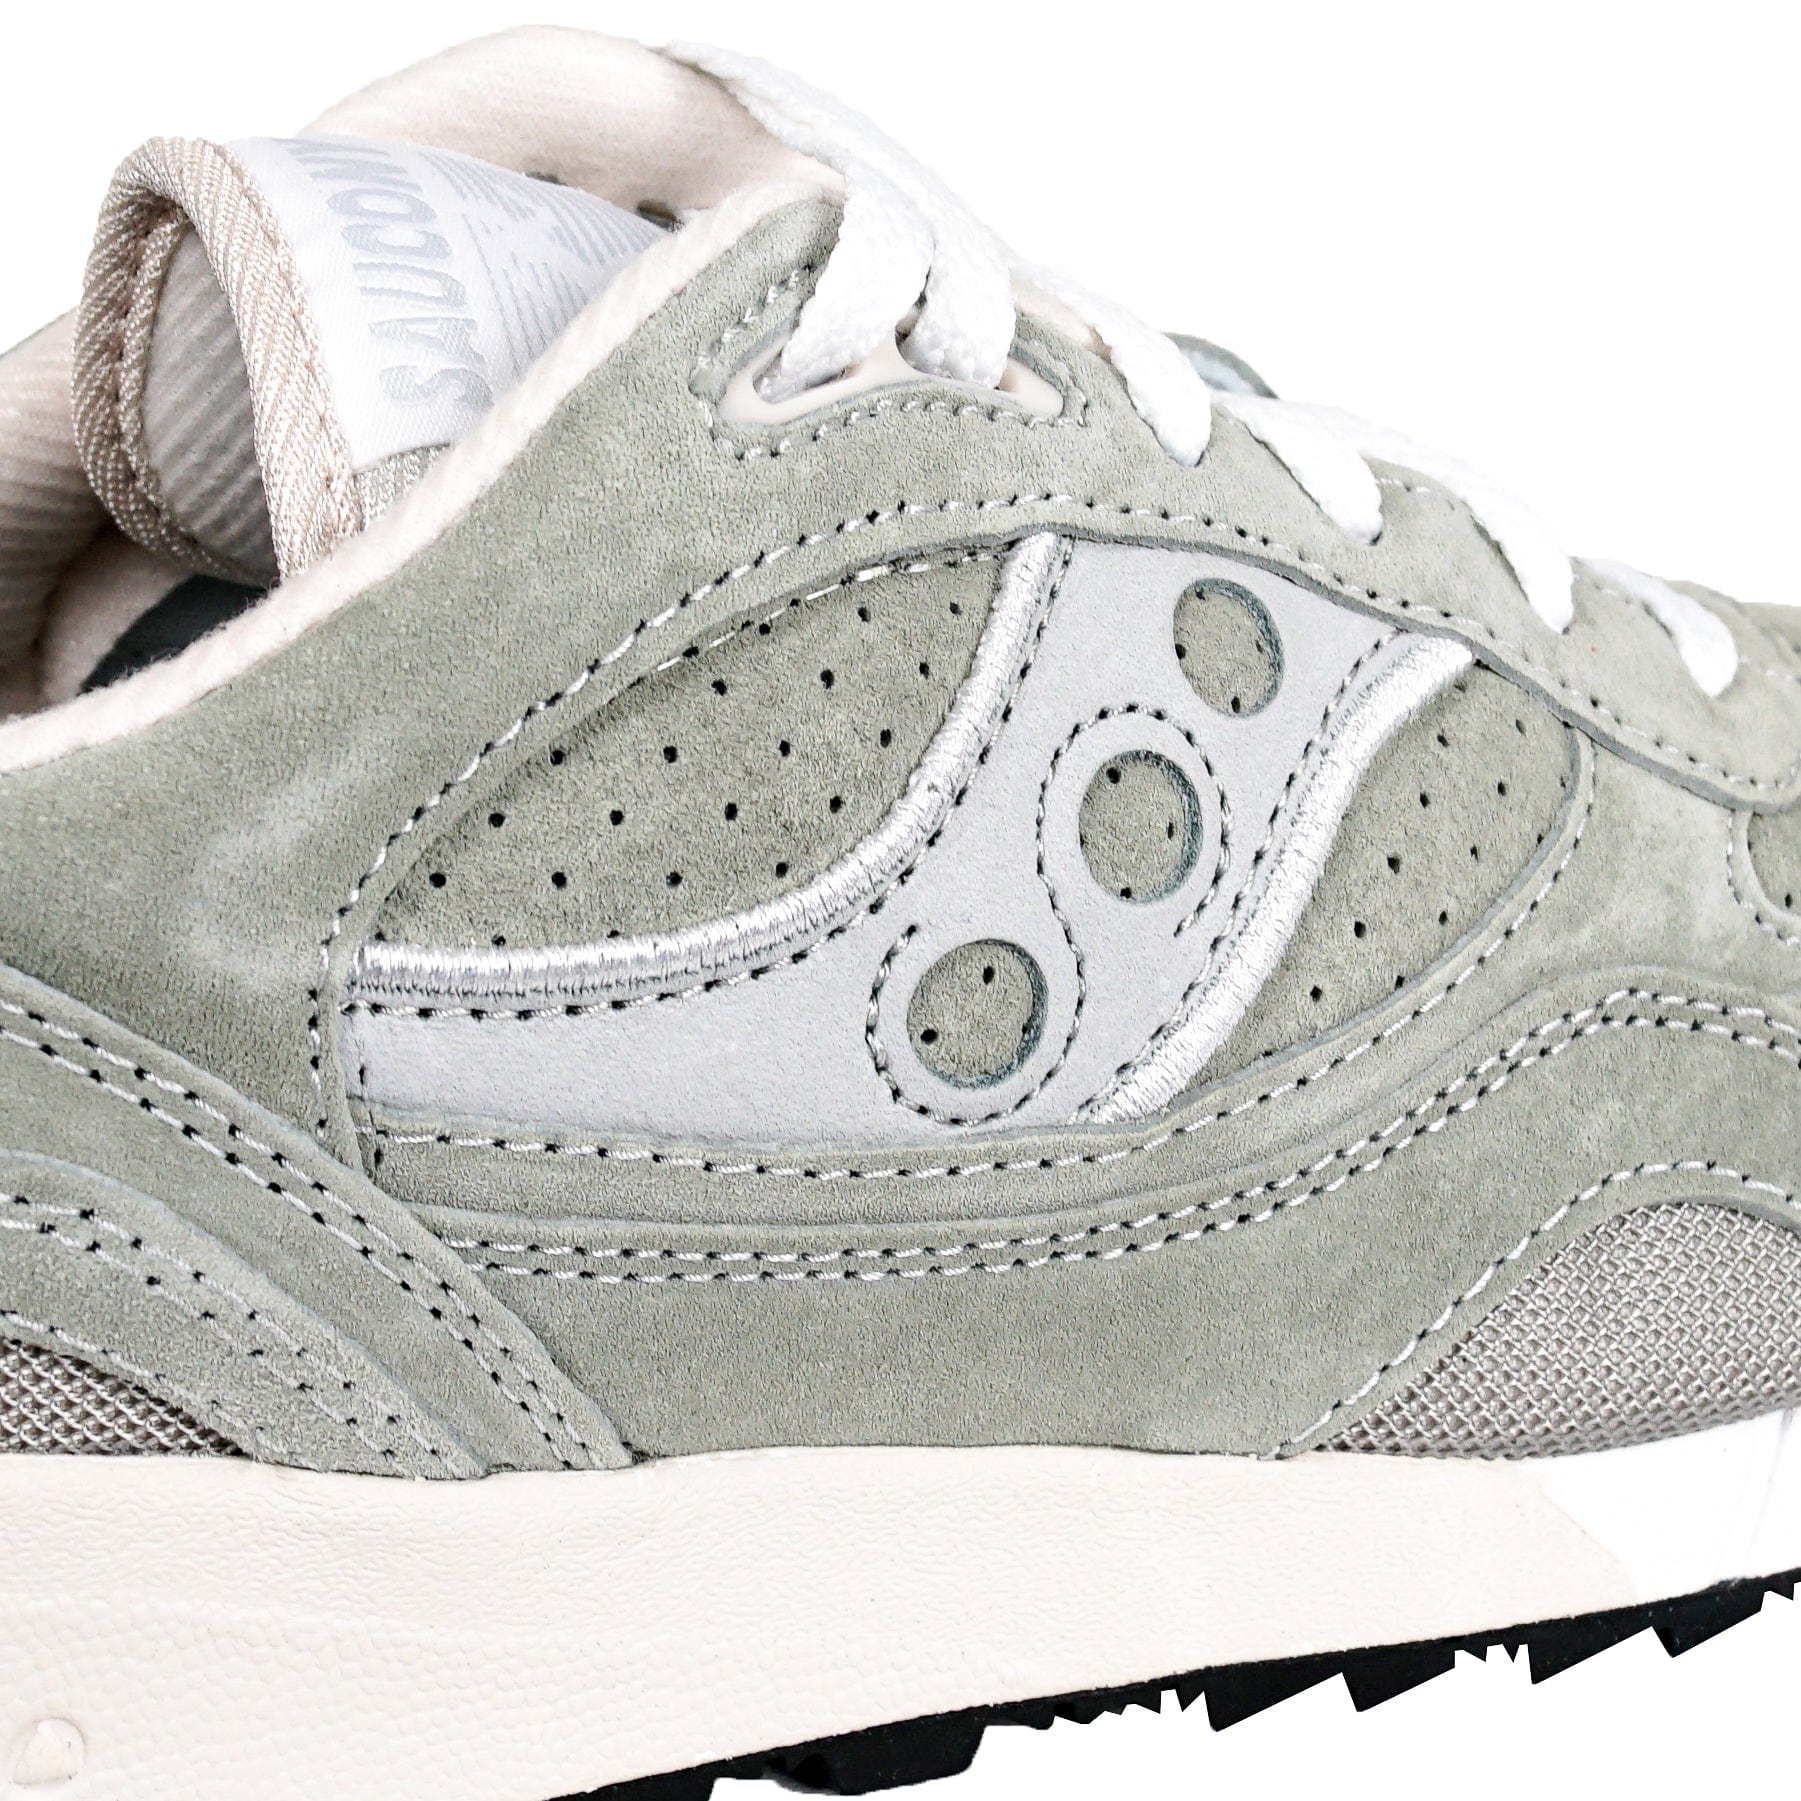 Shadow 6000 Premium in grey - Saucony - State Of Flux